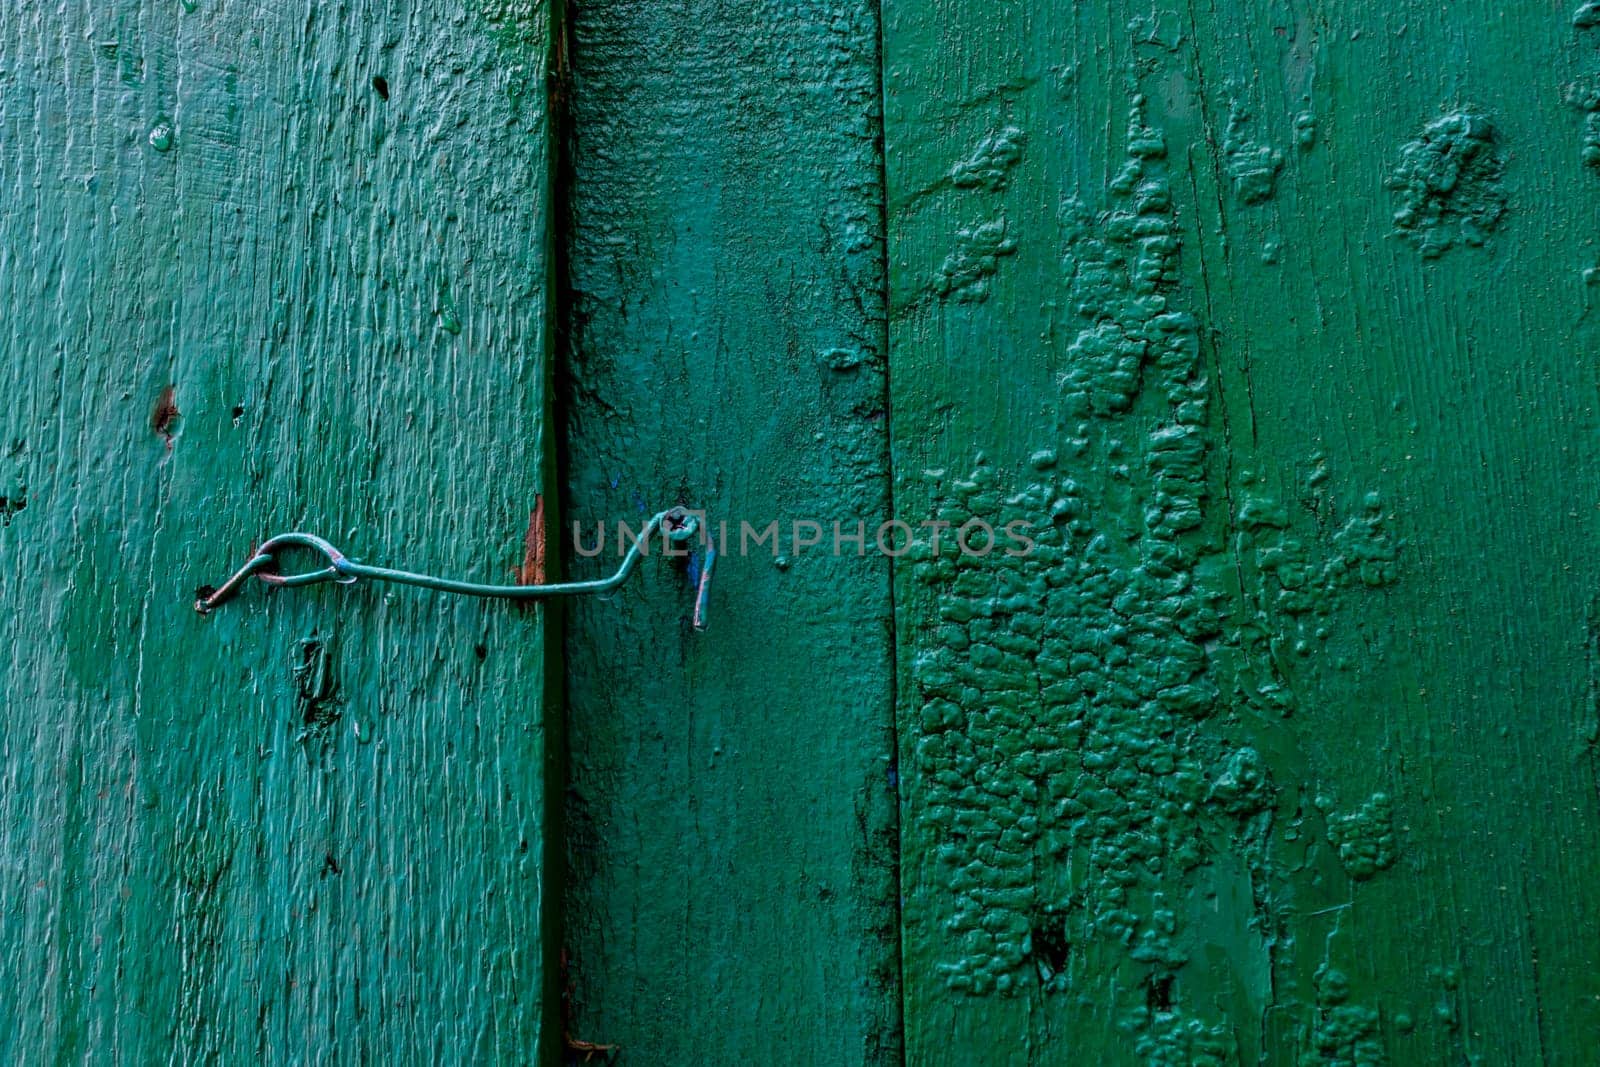 Homemade hook on the gate as a lock. The boards are old painted green.